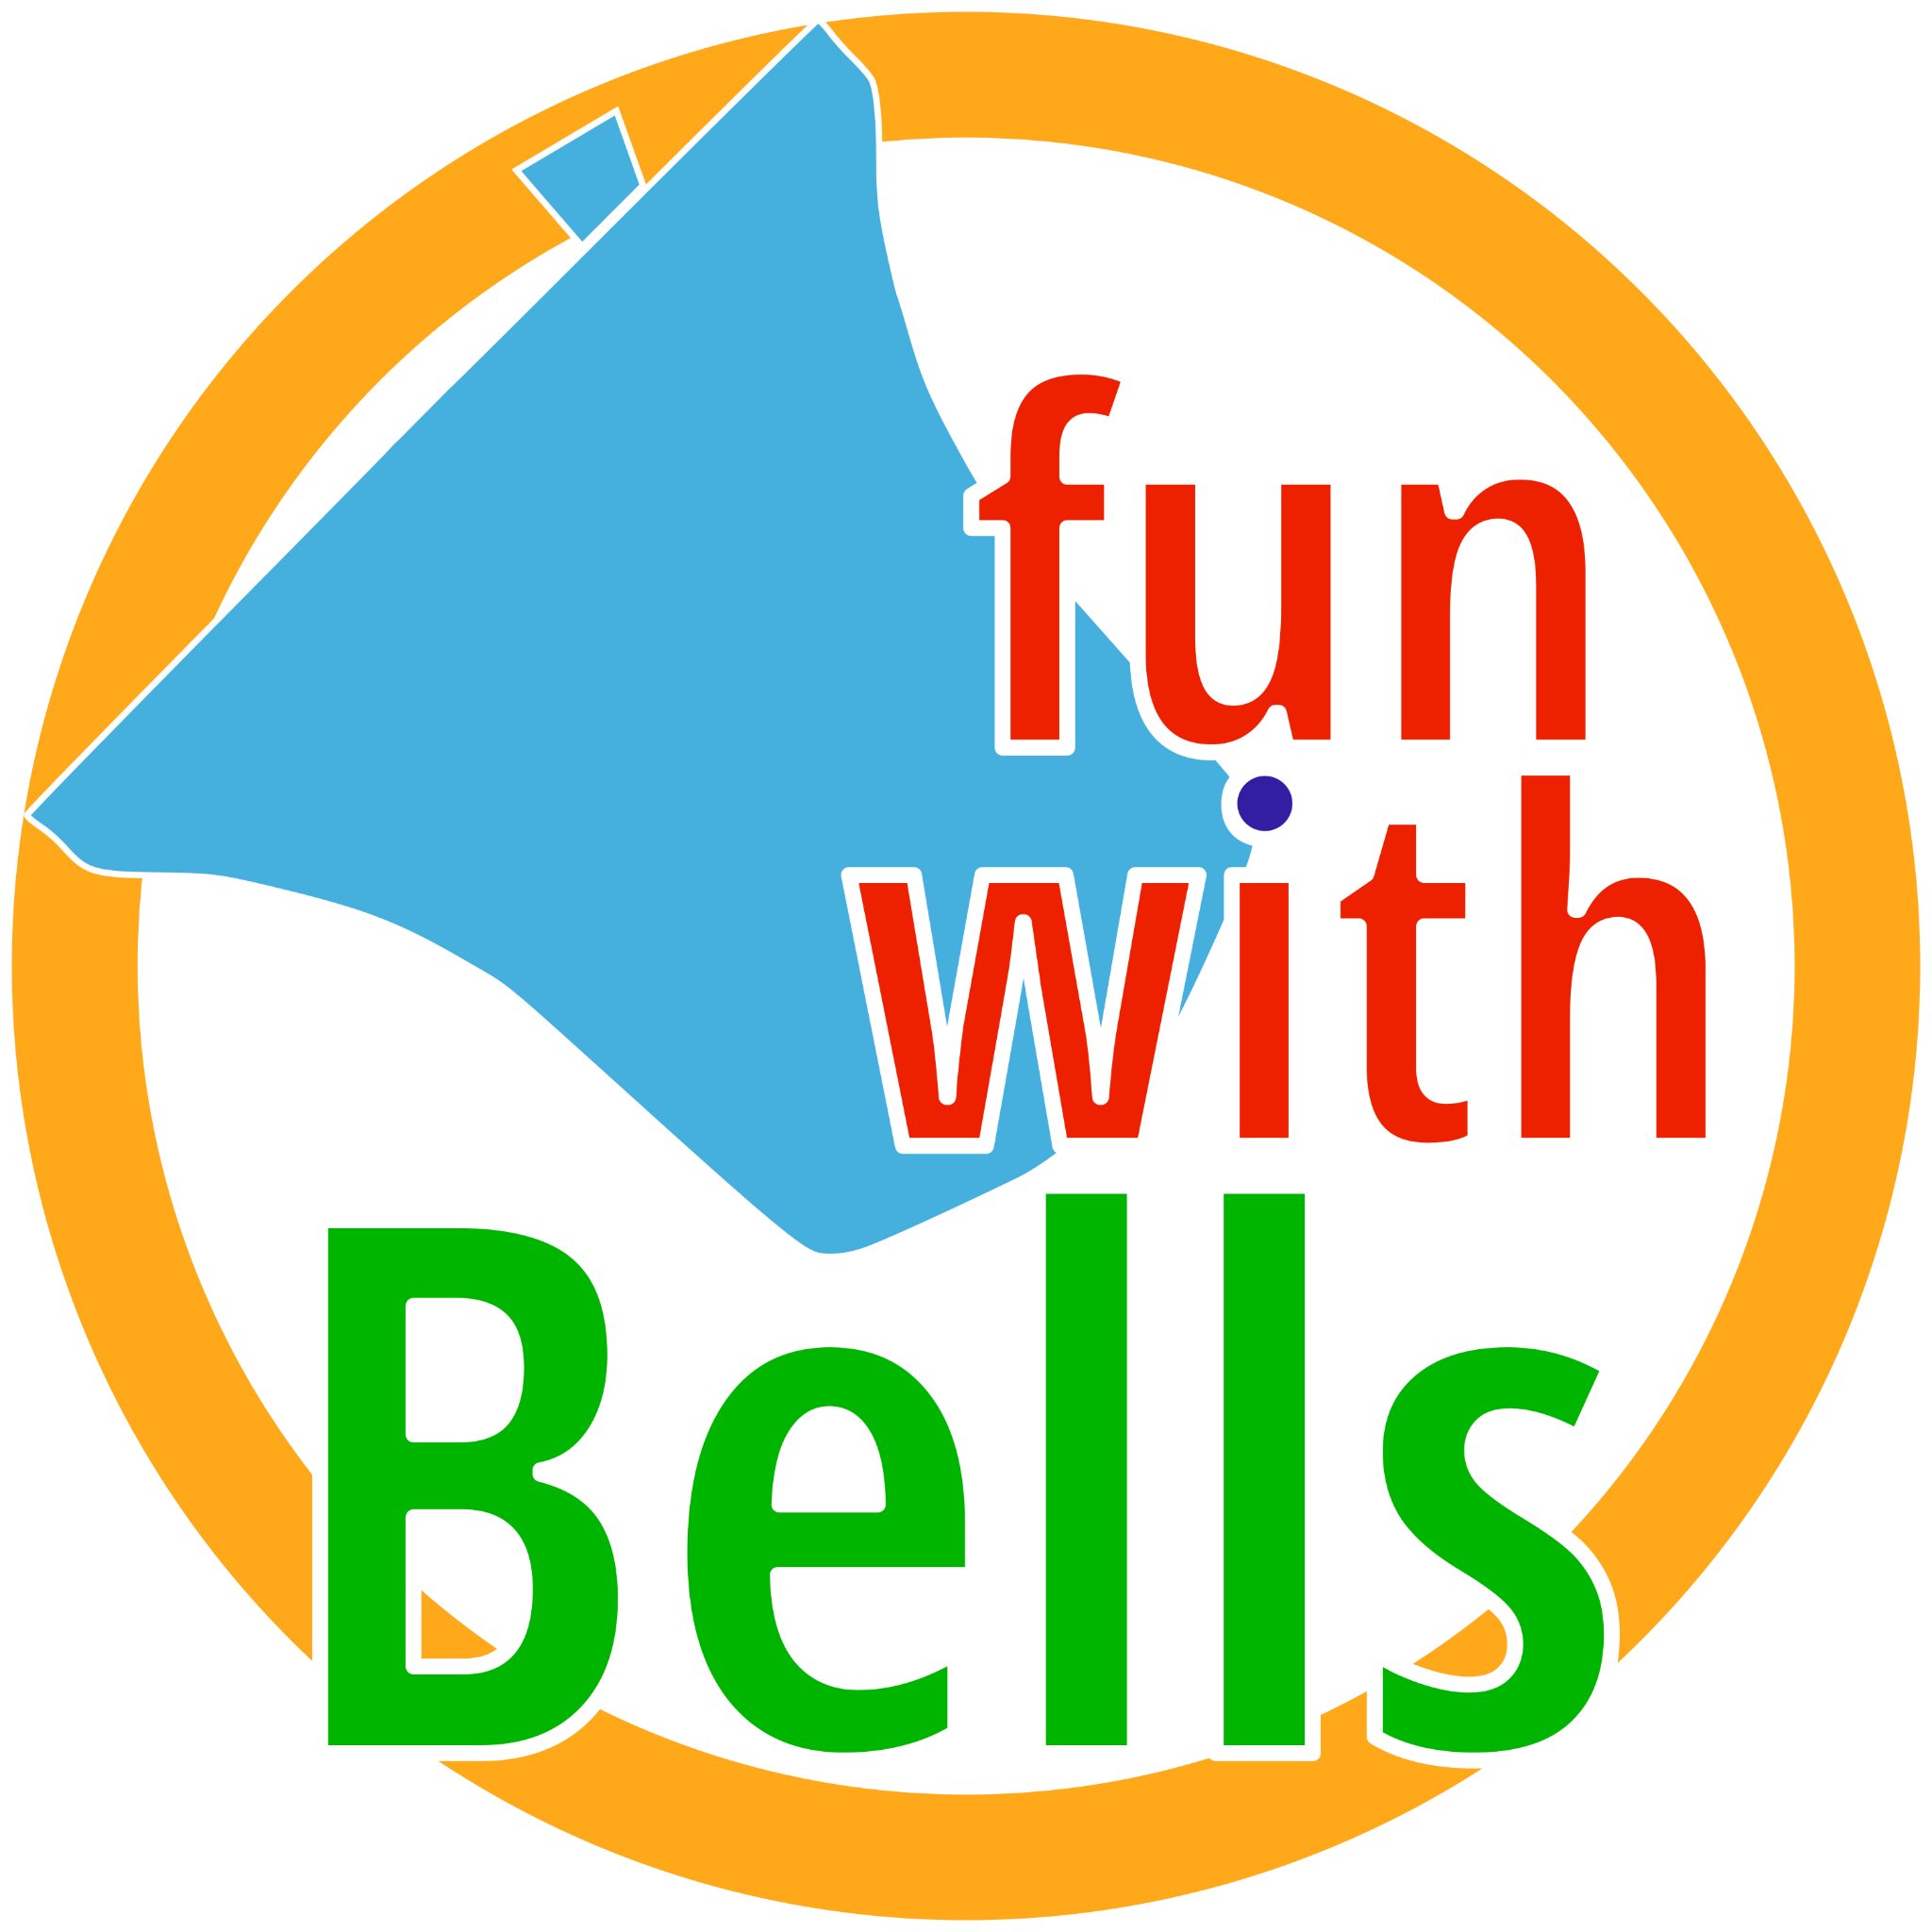 Hosted by Cathy Booth, a wife and mother of bell ringers, this podcast offers an exciting collection of stories and conversations from bell ringers everywhere.